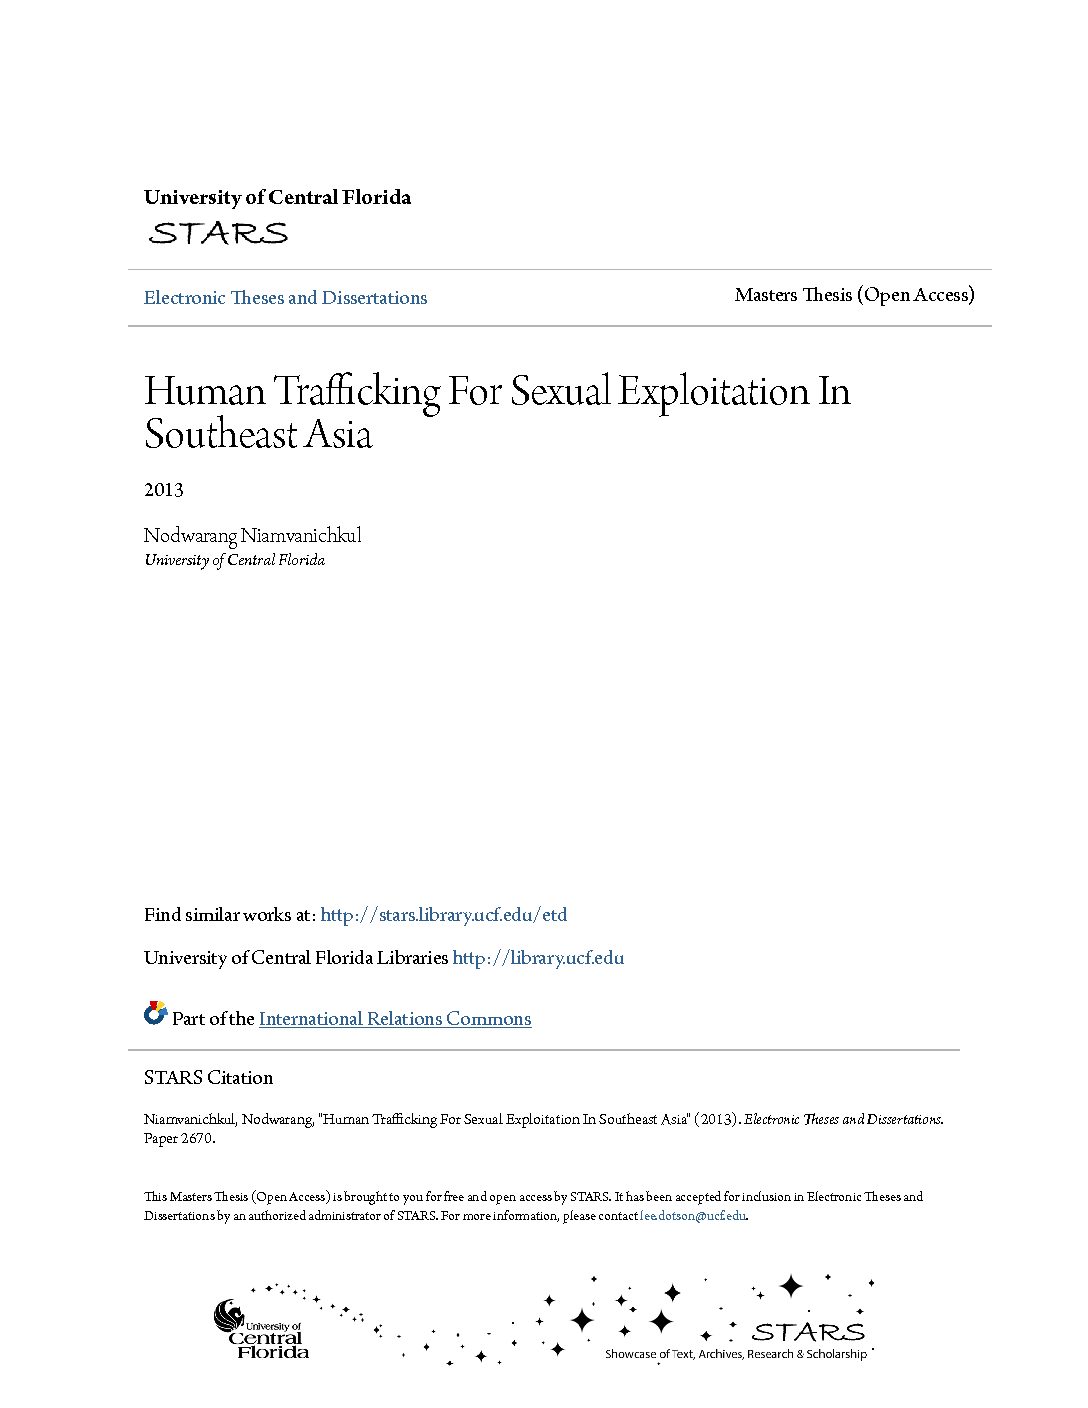 Human Trafficking For Sexual Exploitation In Southeast Asia